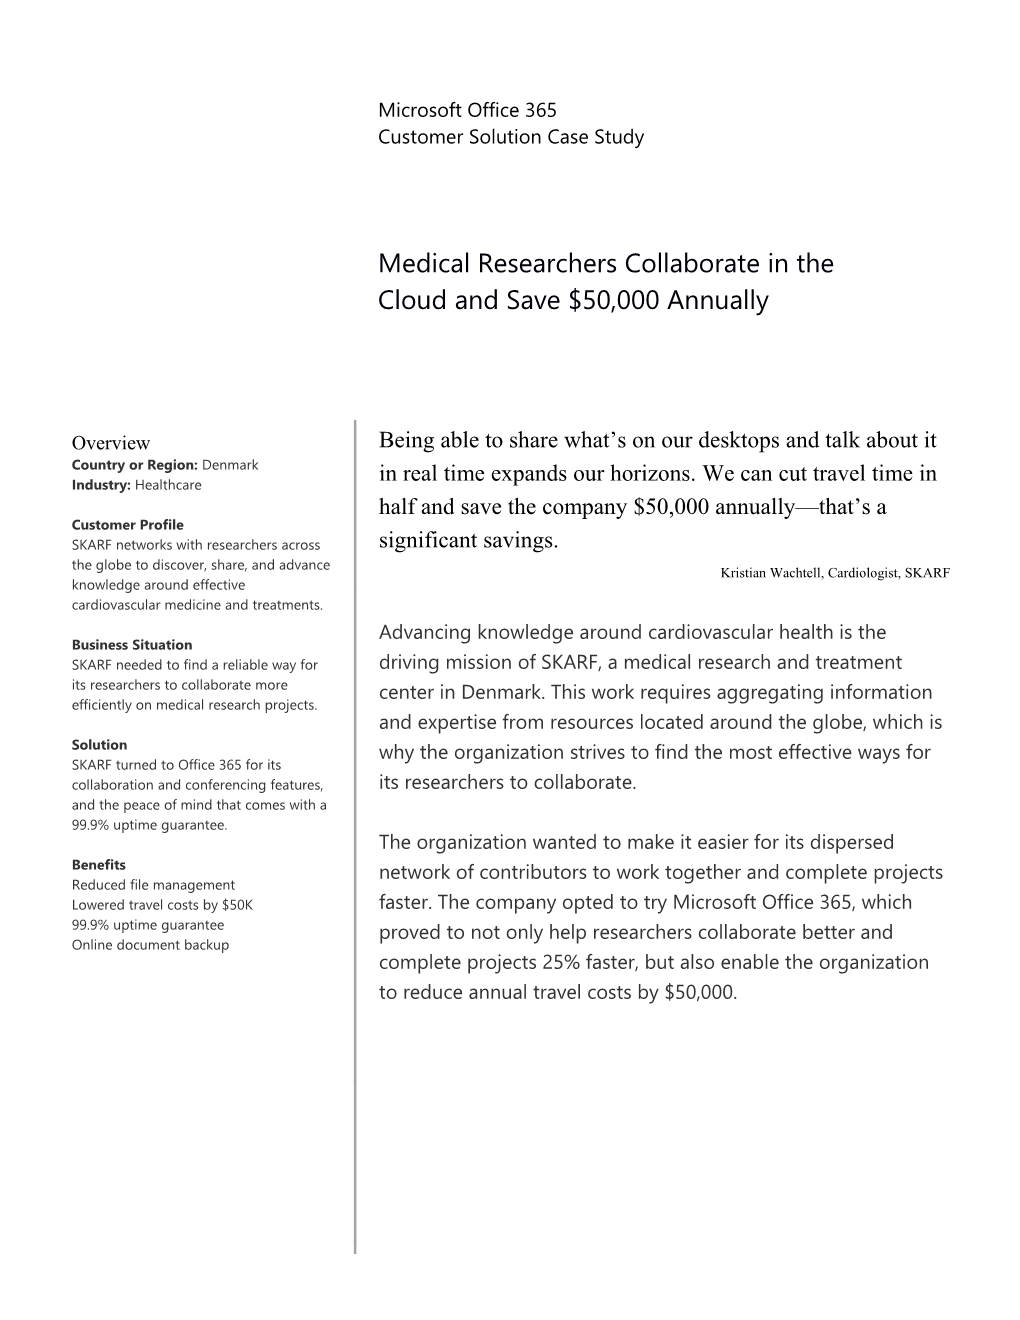 Medical Researchers Collaborate in the Cloud and Save $50,000 Annually